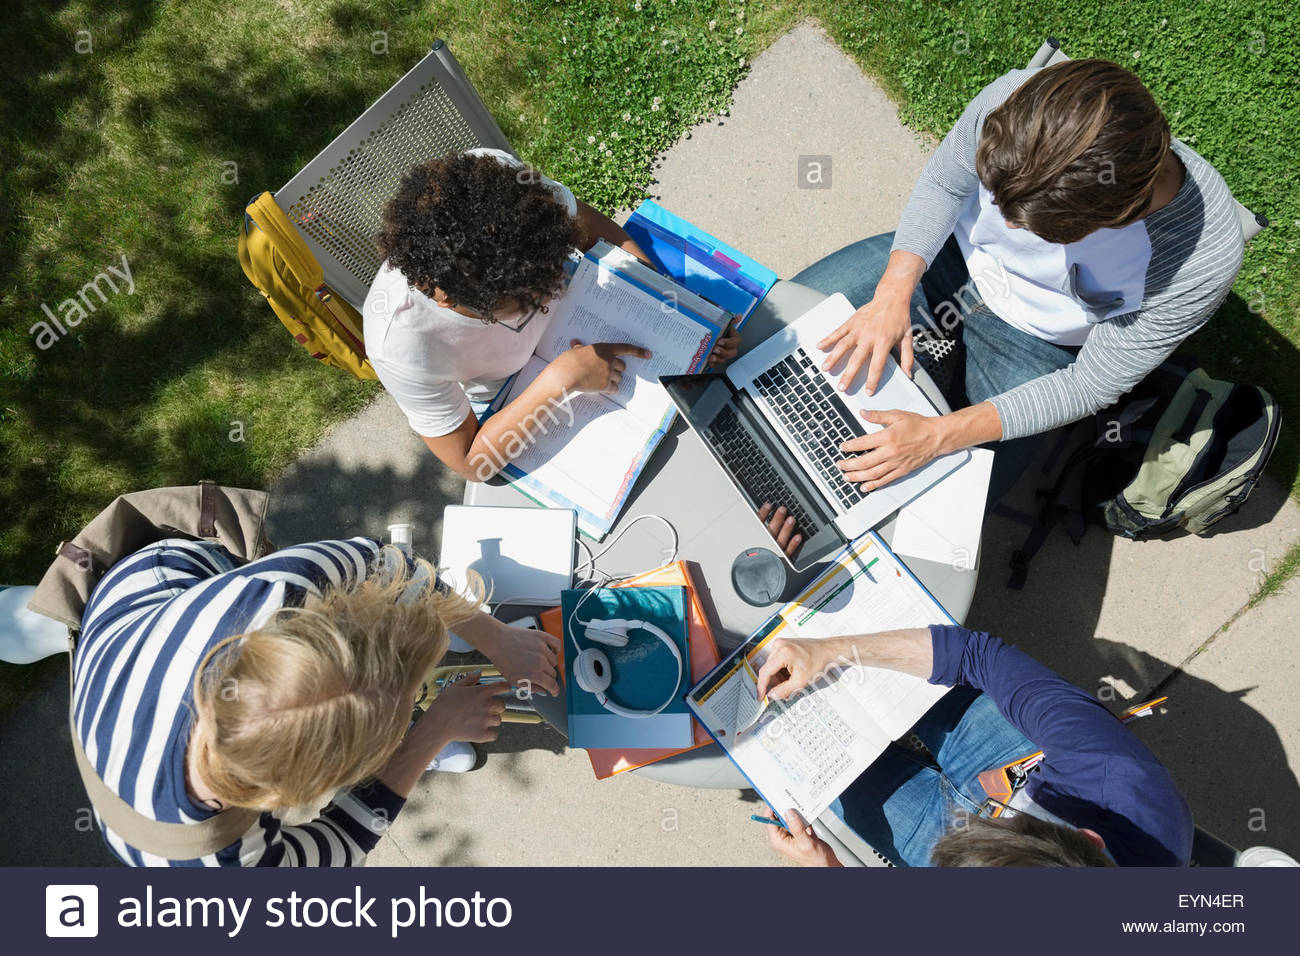 Overhead view college students studying at table Stock Photo